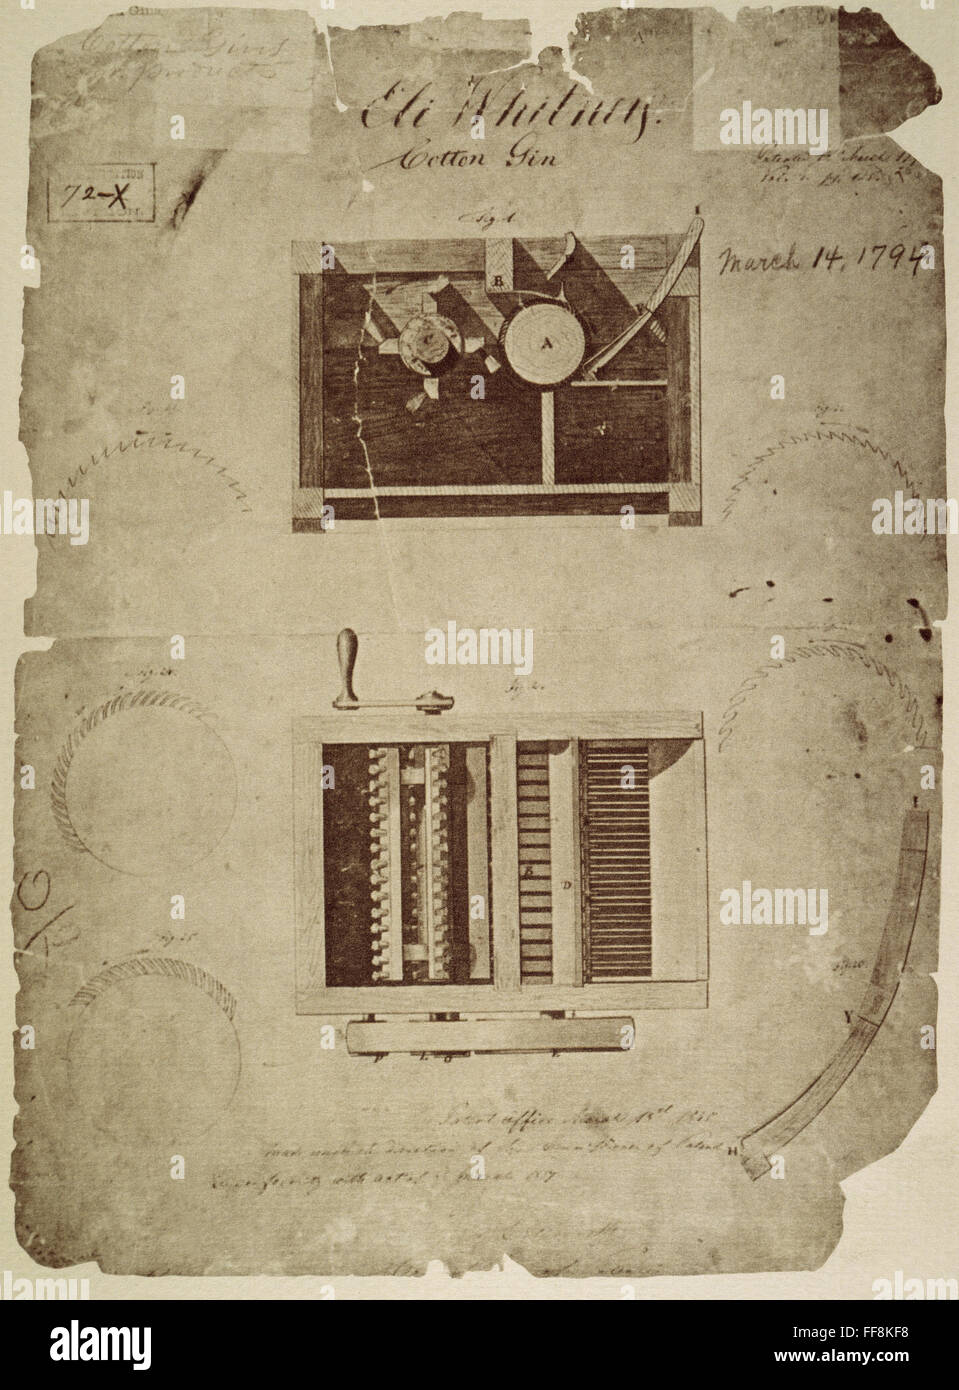 WHITNEY'S COTTON GIN. /nPatent drawing, dated March 14, 1794, for Eli Whitney's cotton gin. Stock Photo